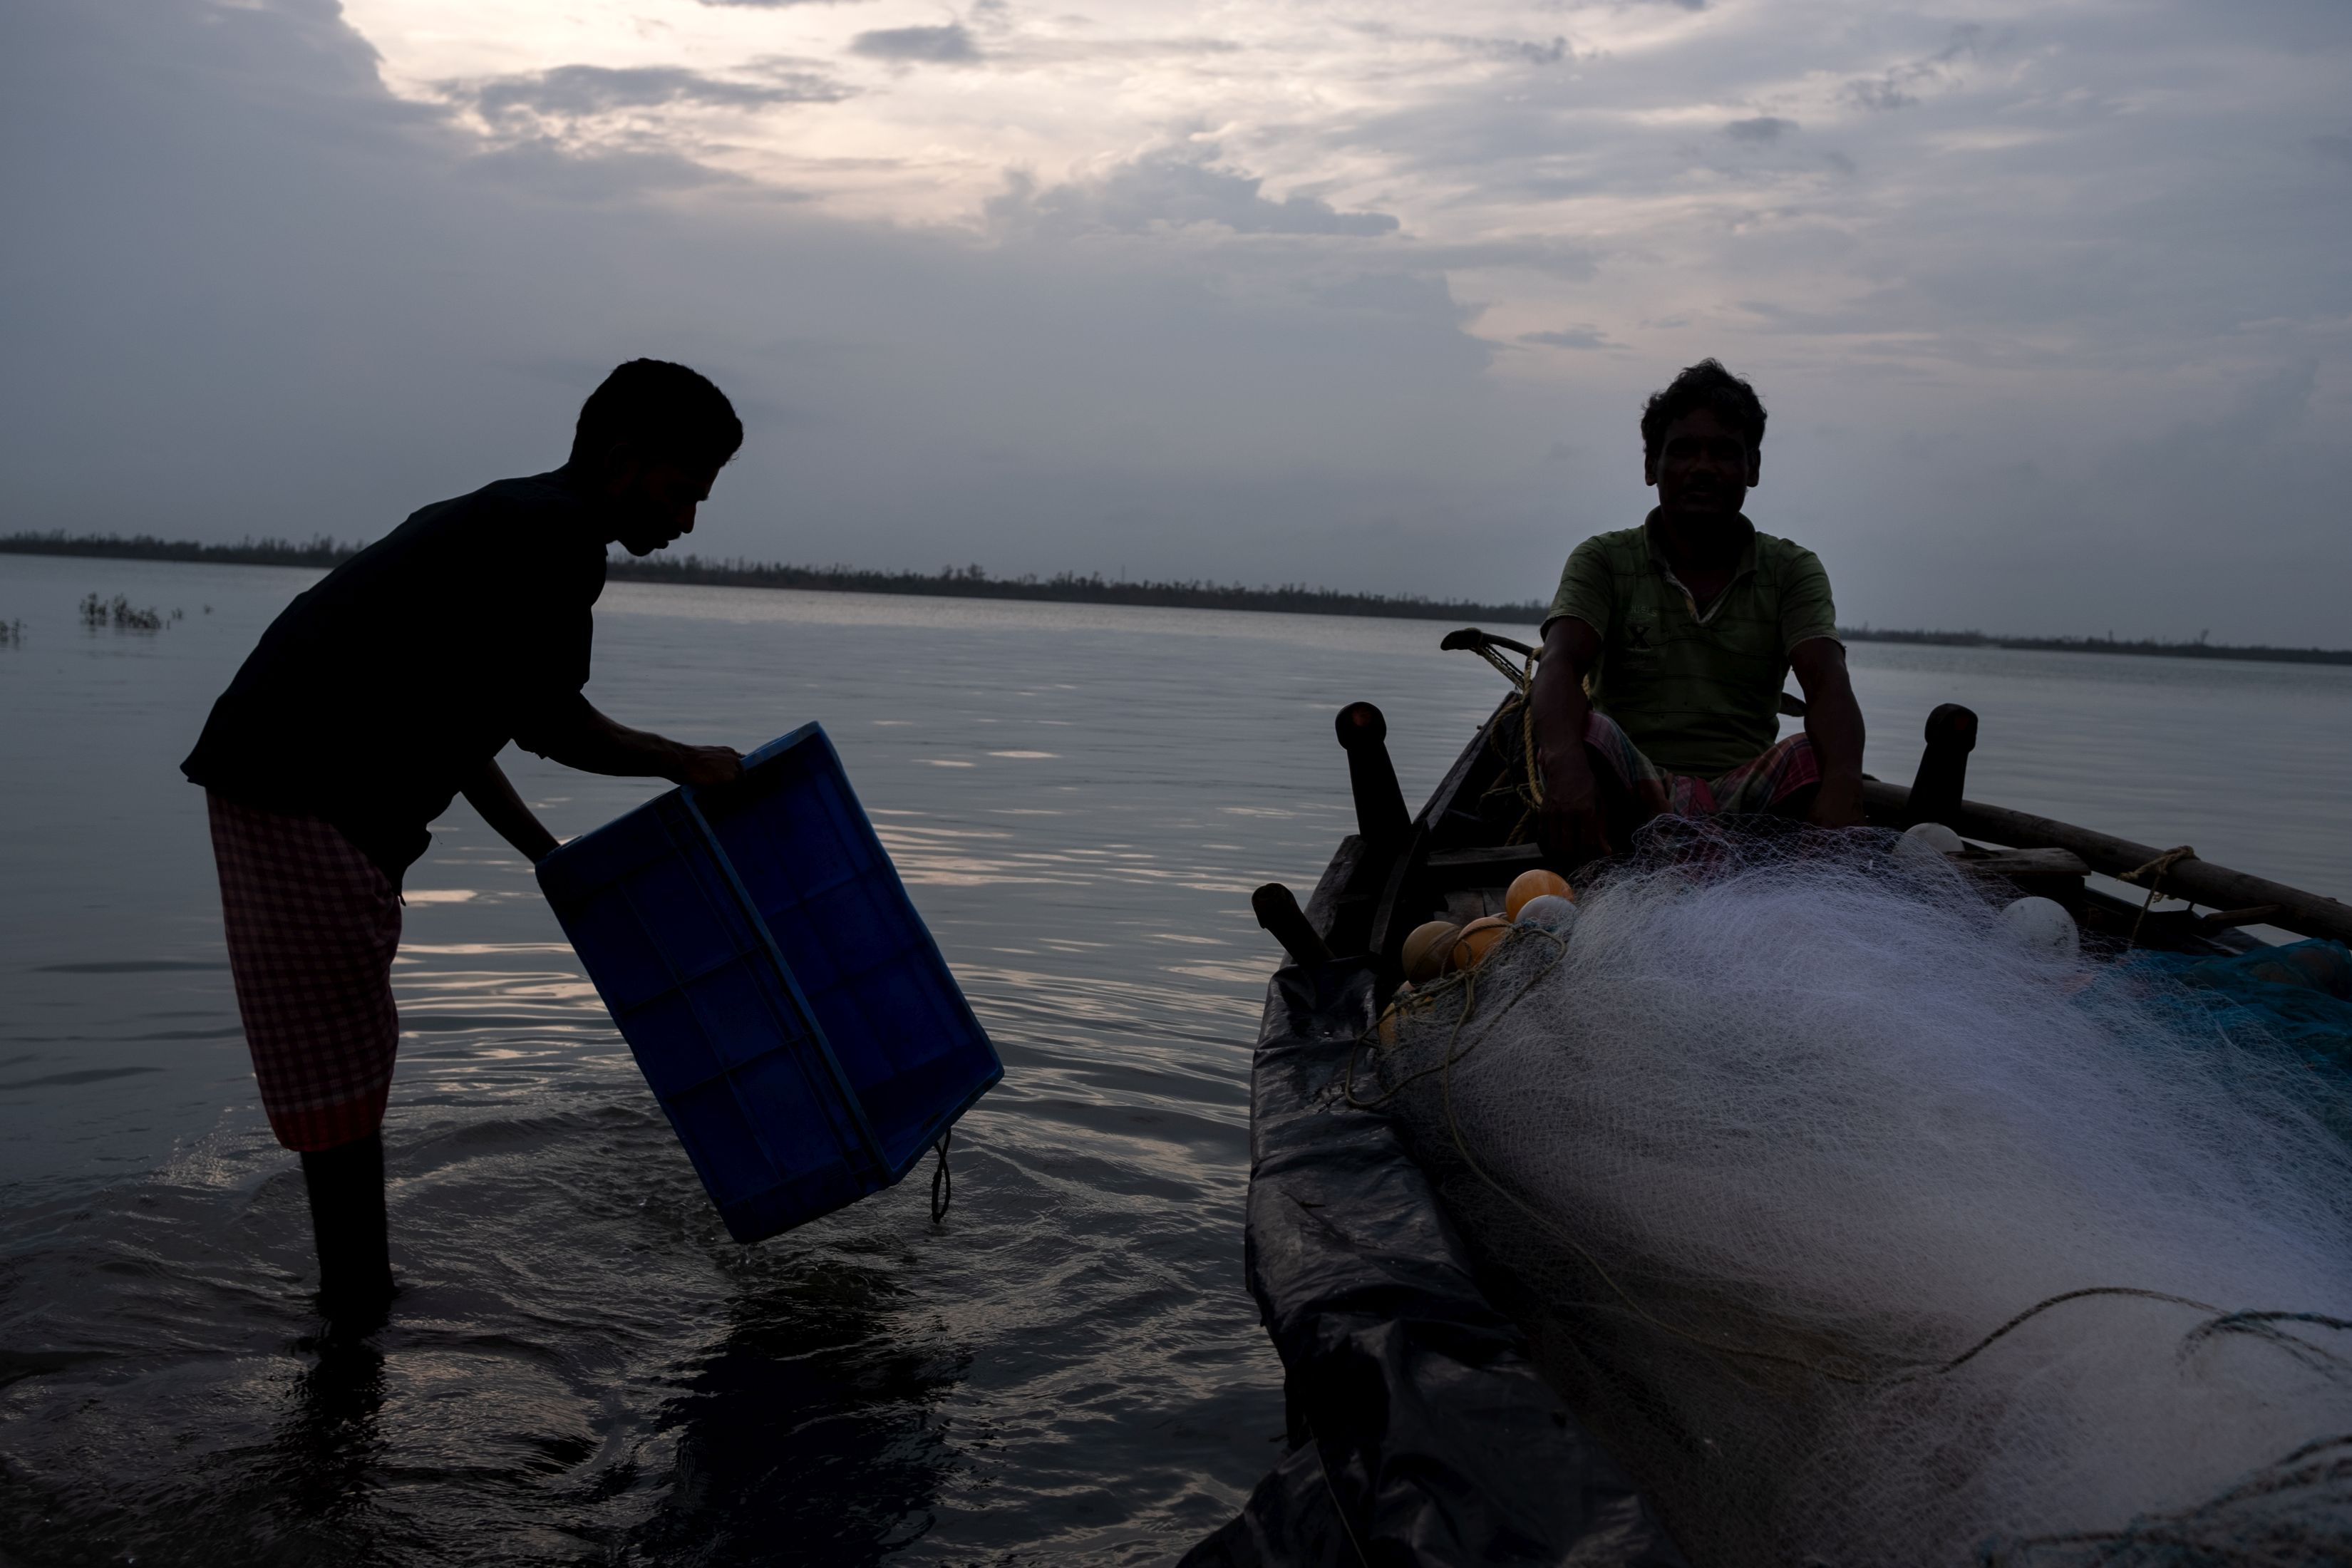 Men go out in their boats to fish and later sell these fishes. (Image: WaterAid, Subhrajit Sen)